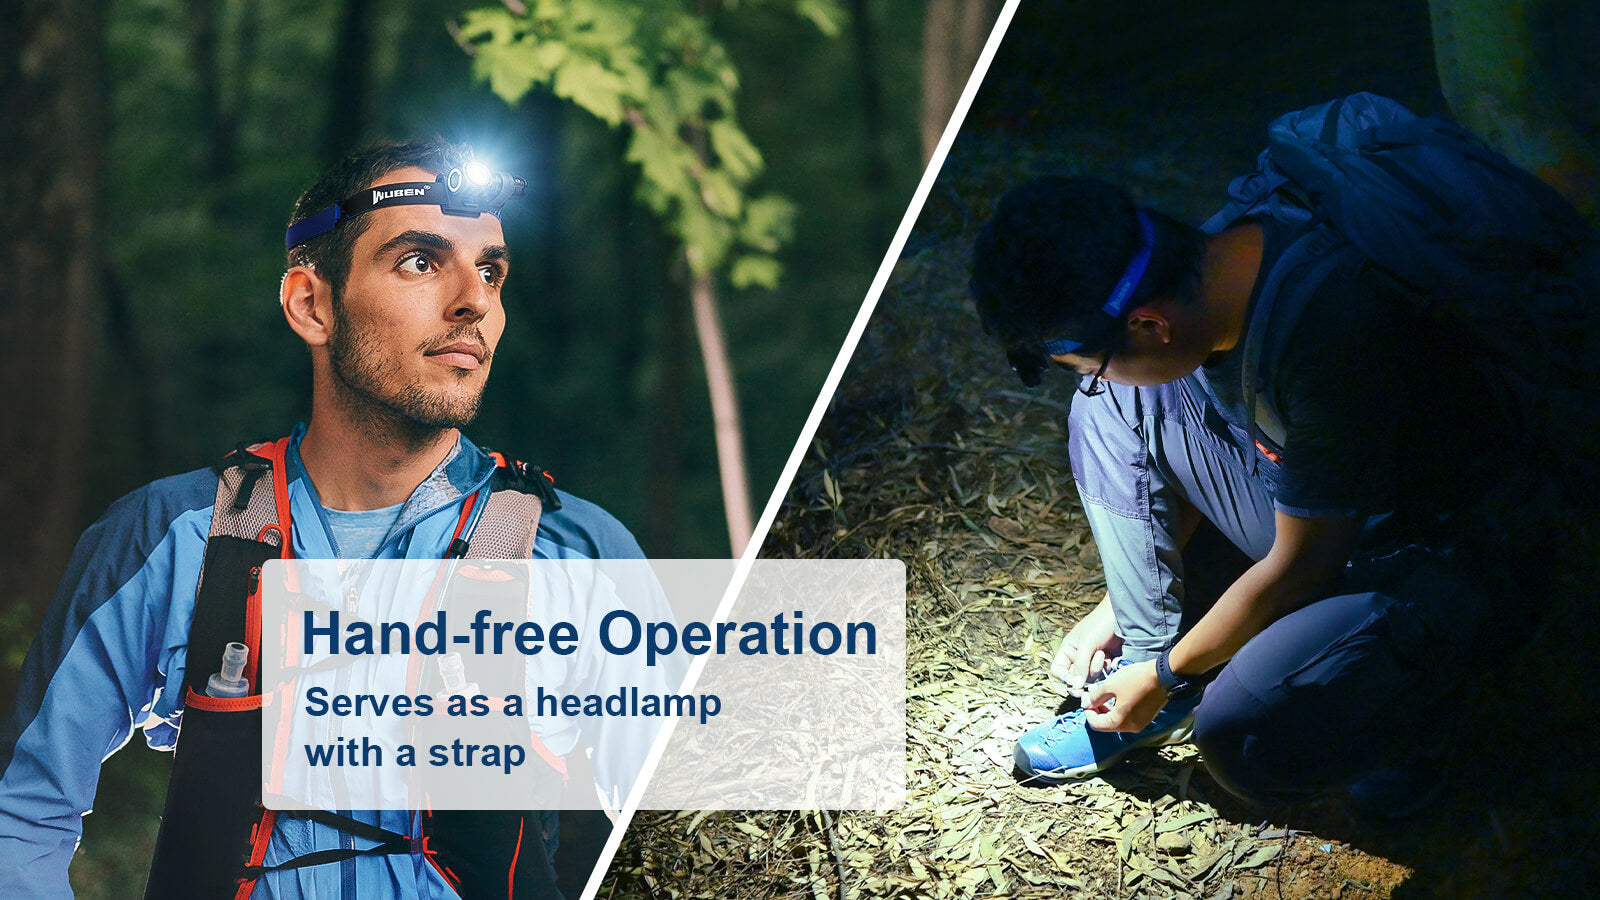 Hand-free Operation
Serves as a headlamp with a strap